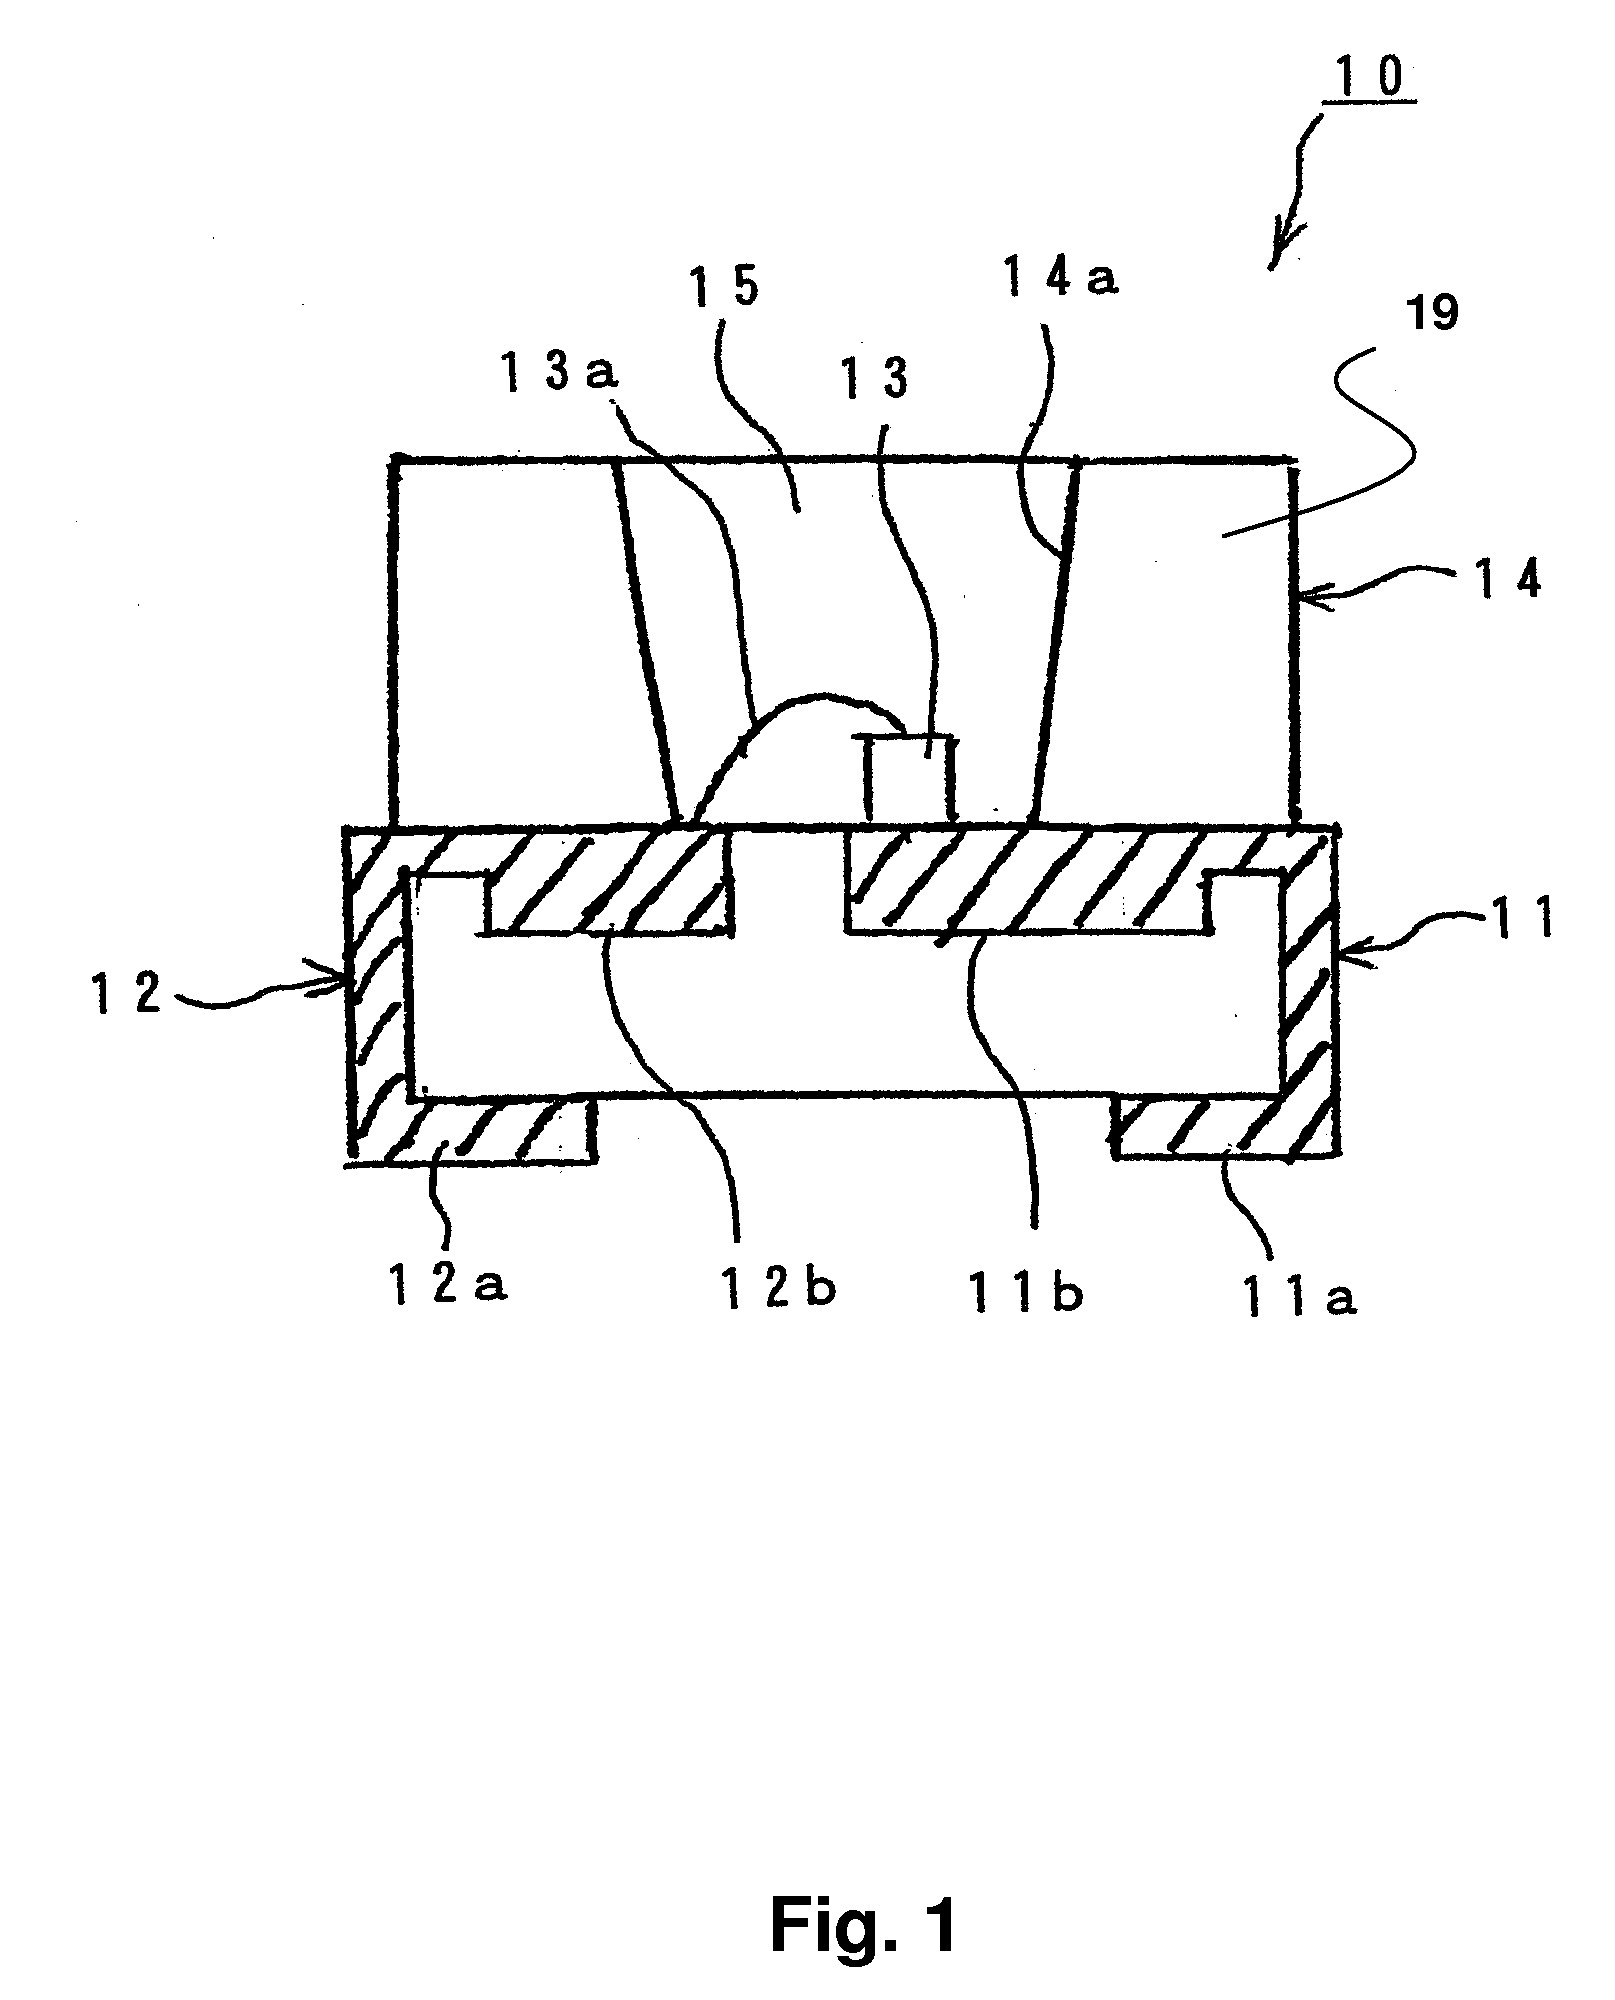 Surface mount type semiconductor device and lead frame structure thereof